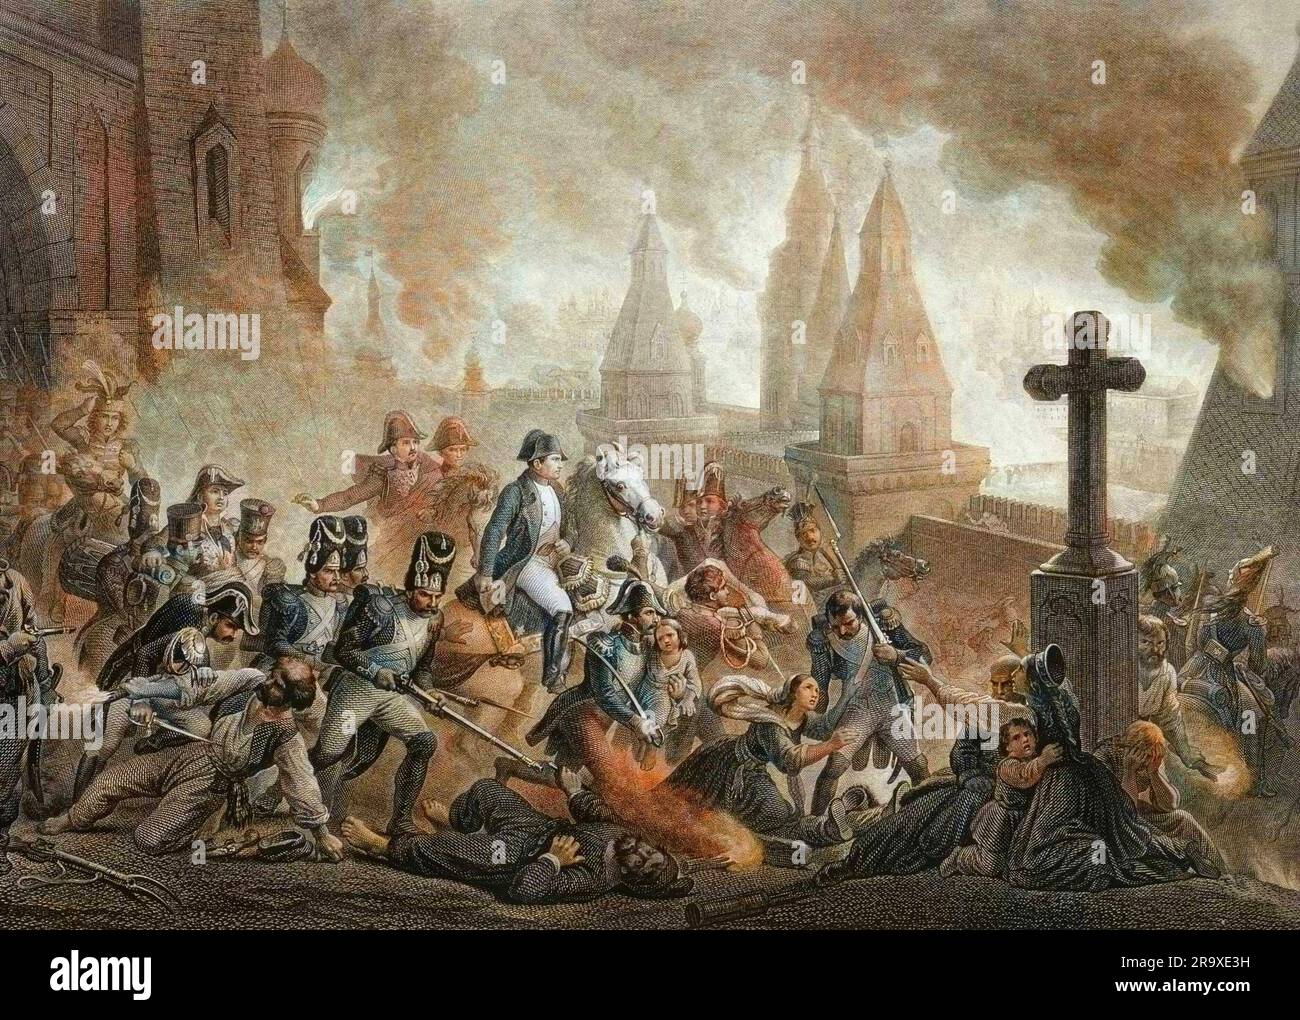 Napoleon Bonaparte and the burning of Moscow, September 1812, Russia, 19th century Stock Photo